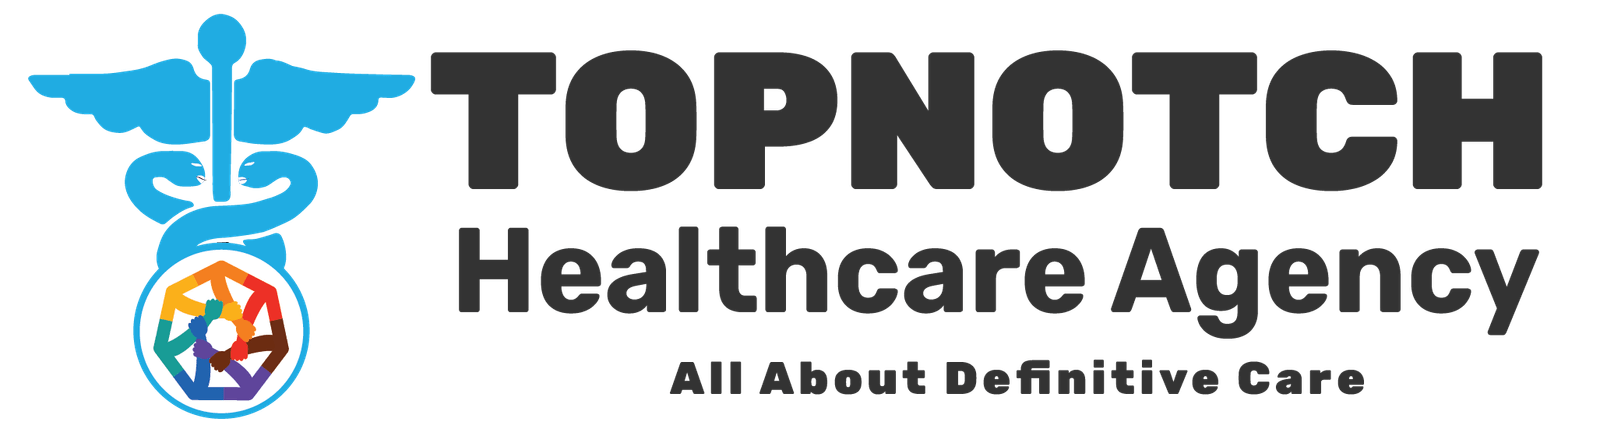 Topnotch Healthcare Agency  - cropped New Topnotch 01 - Footer Container(logo,menu,info,tel,socials)